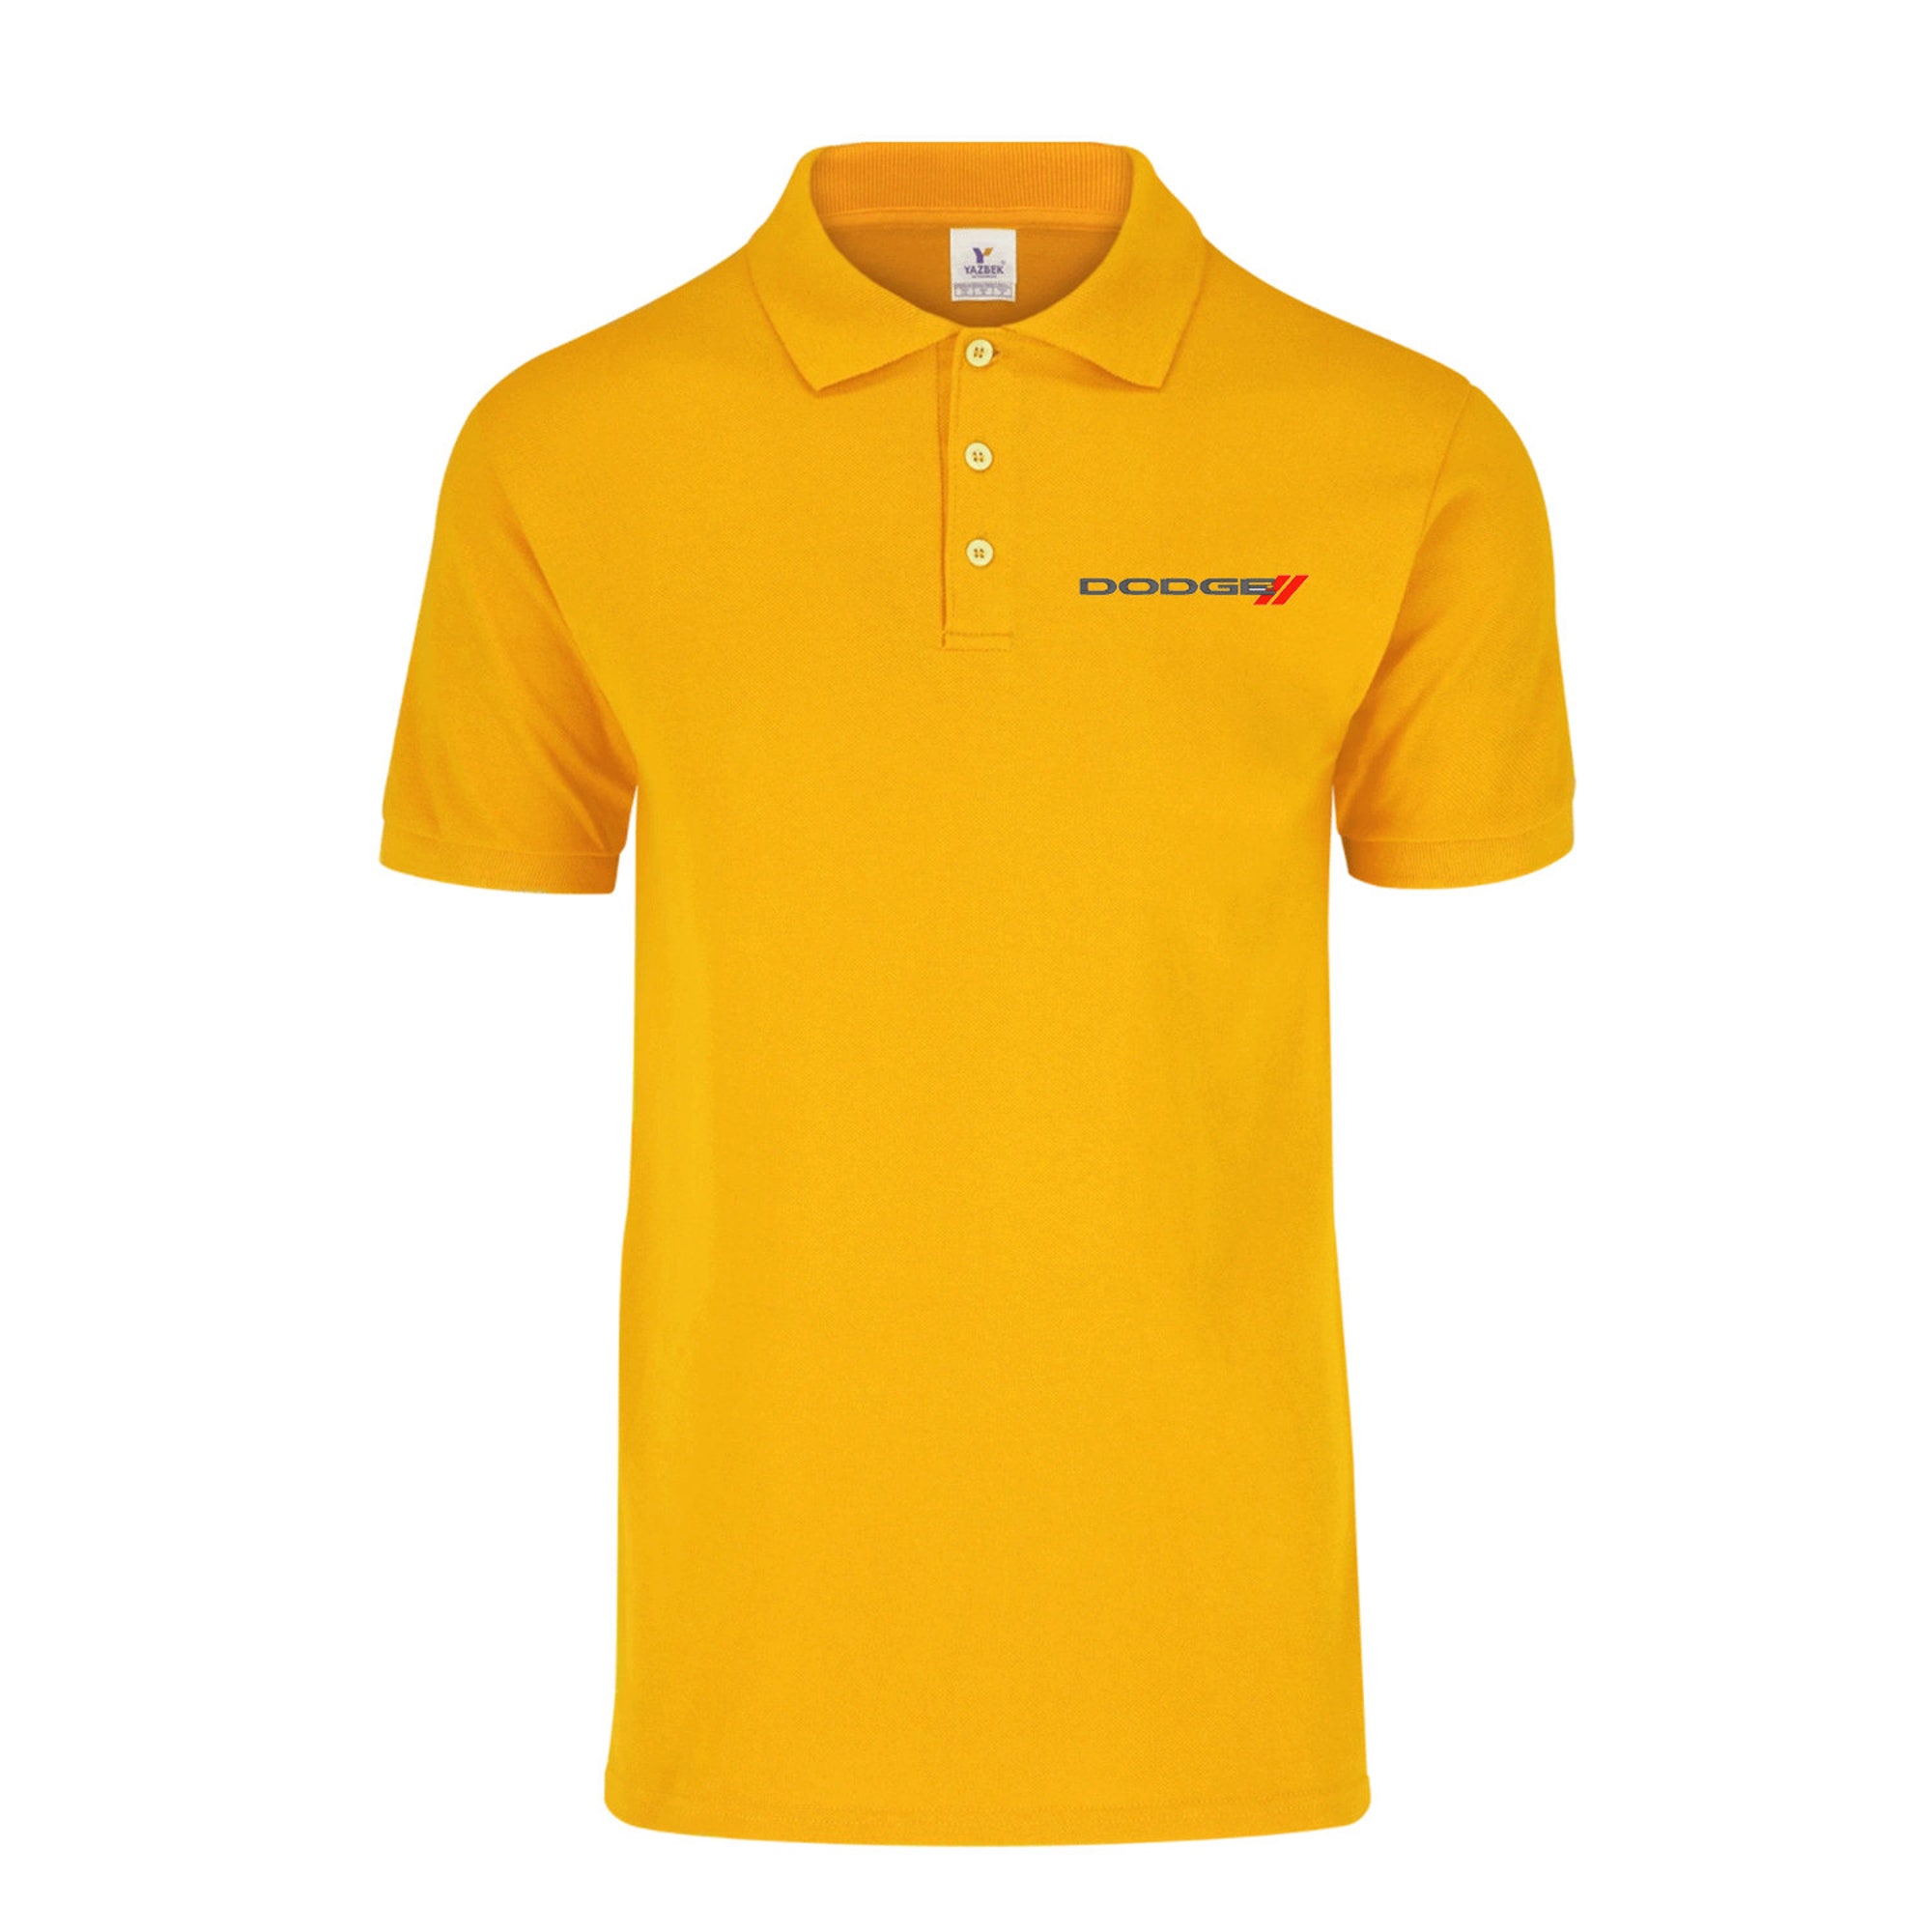 Discover Dodge Logo Embroidery Delivery Men Fitted Polo Shirt